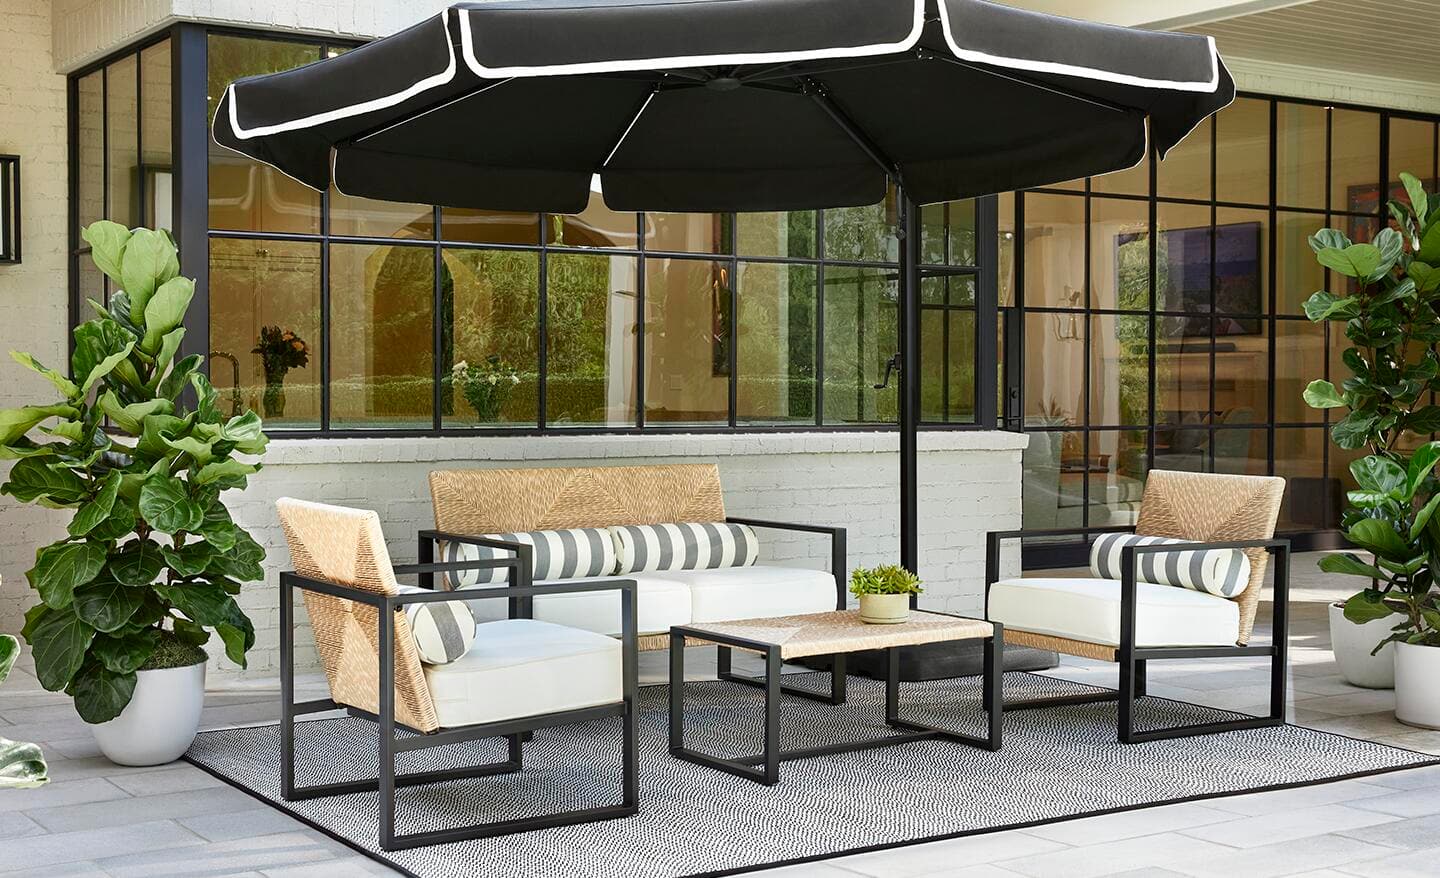 A reinforced aluminum patio set with white cushion chairs and a rectangular wicker coffee table under a patio umbrella.